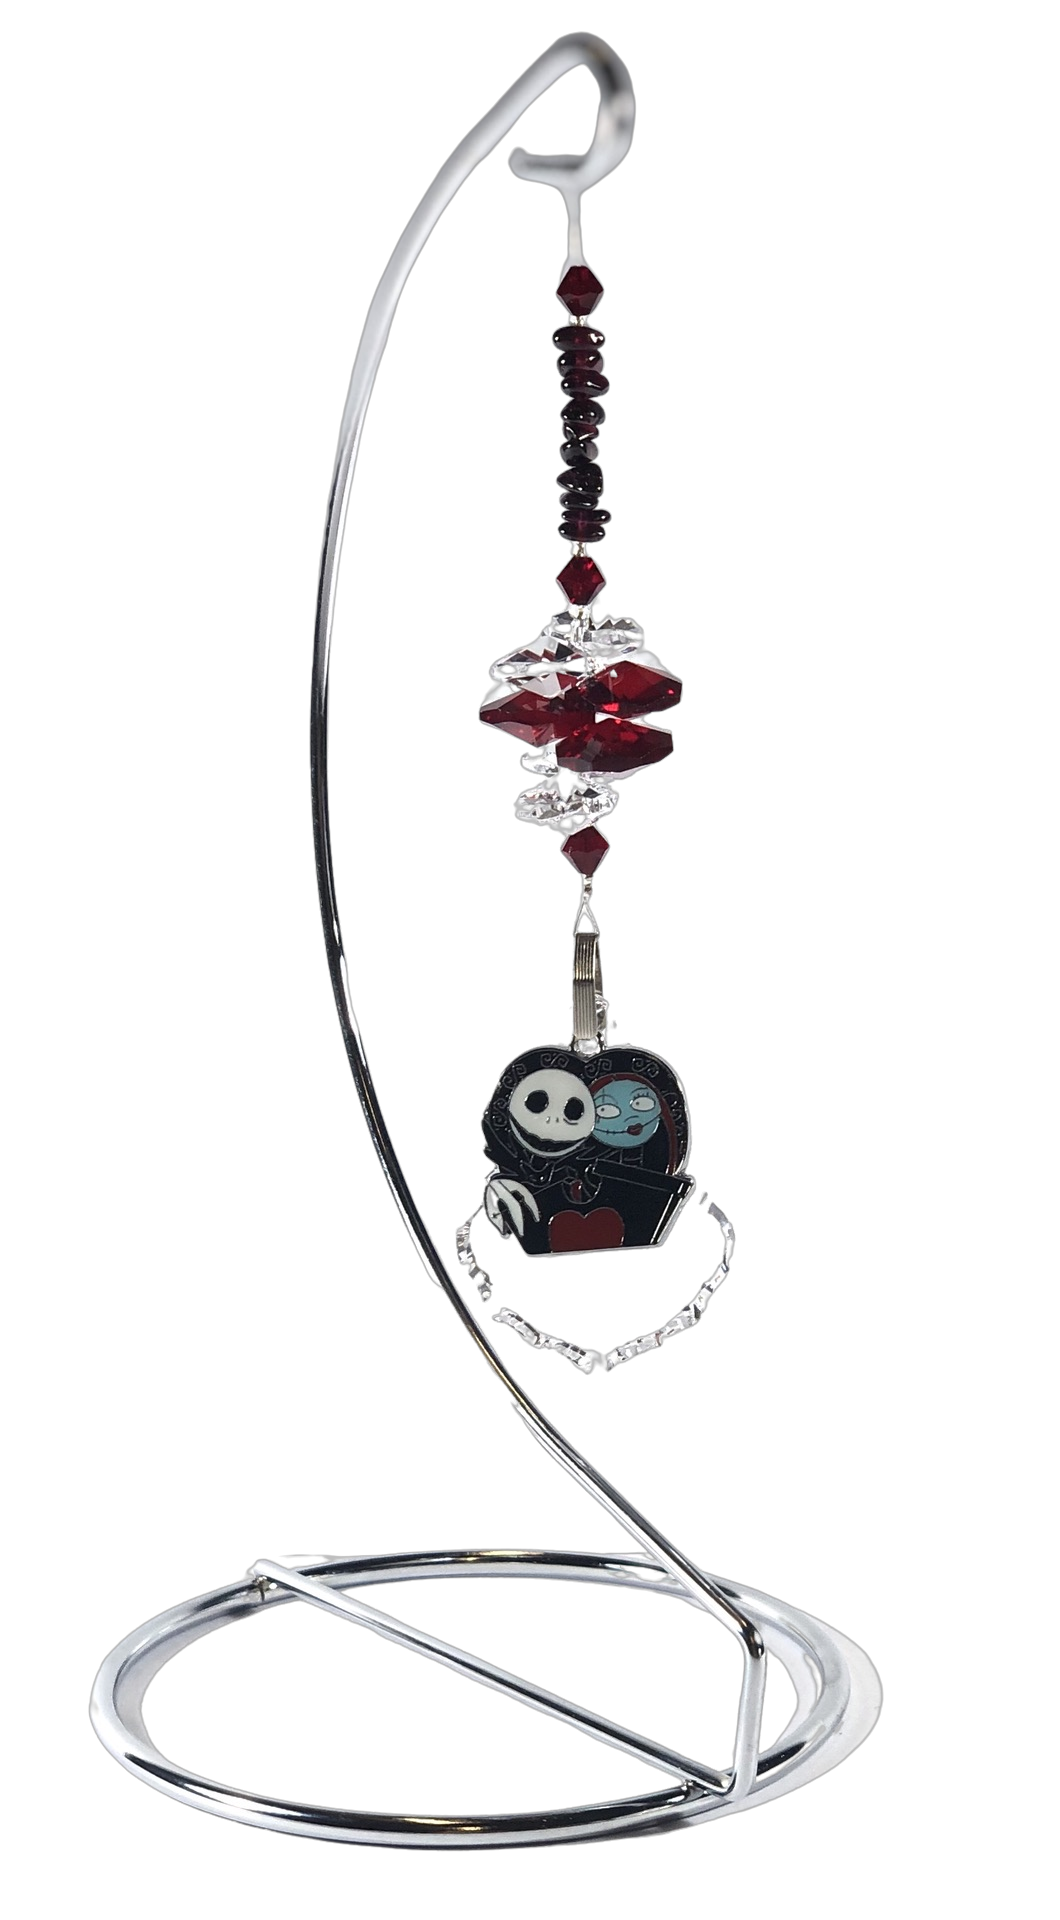 A Nightmare Before Christmas - Jack and Sally crystal suncatcher is decorated with garnet gemstones and come on this amazing stand.